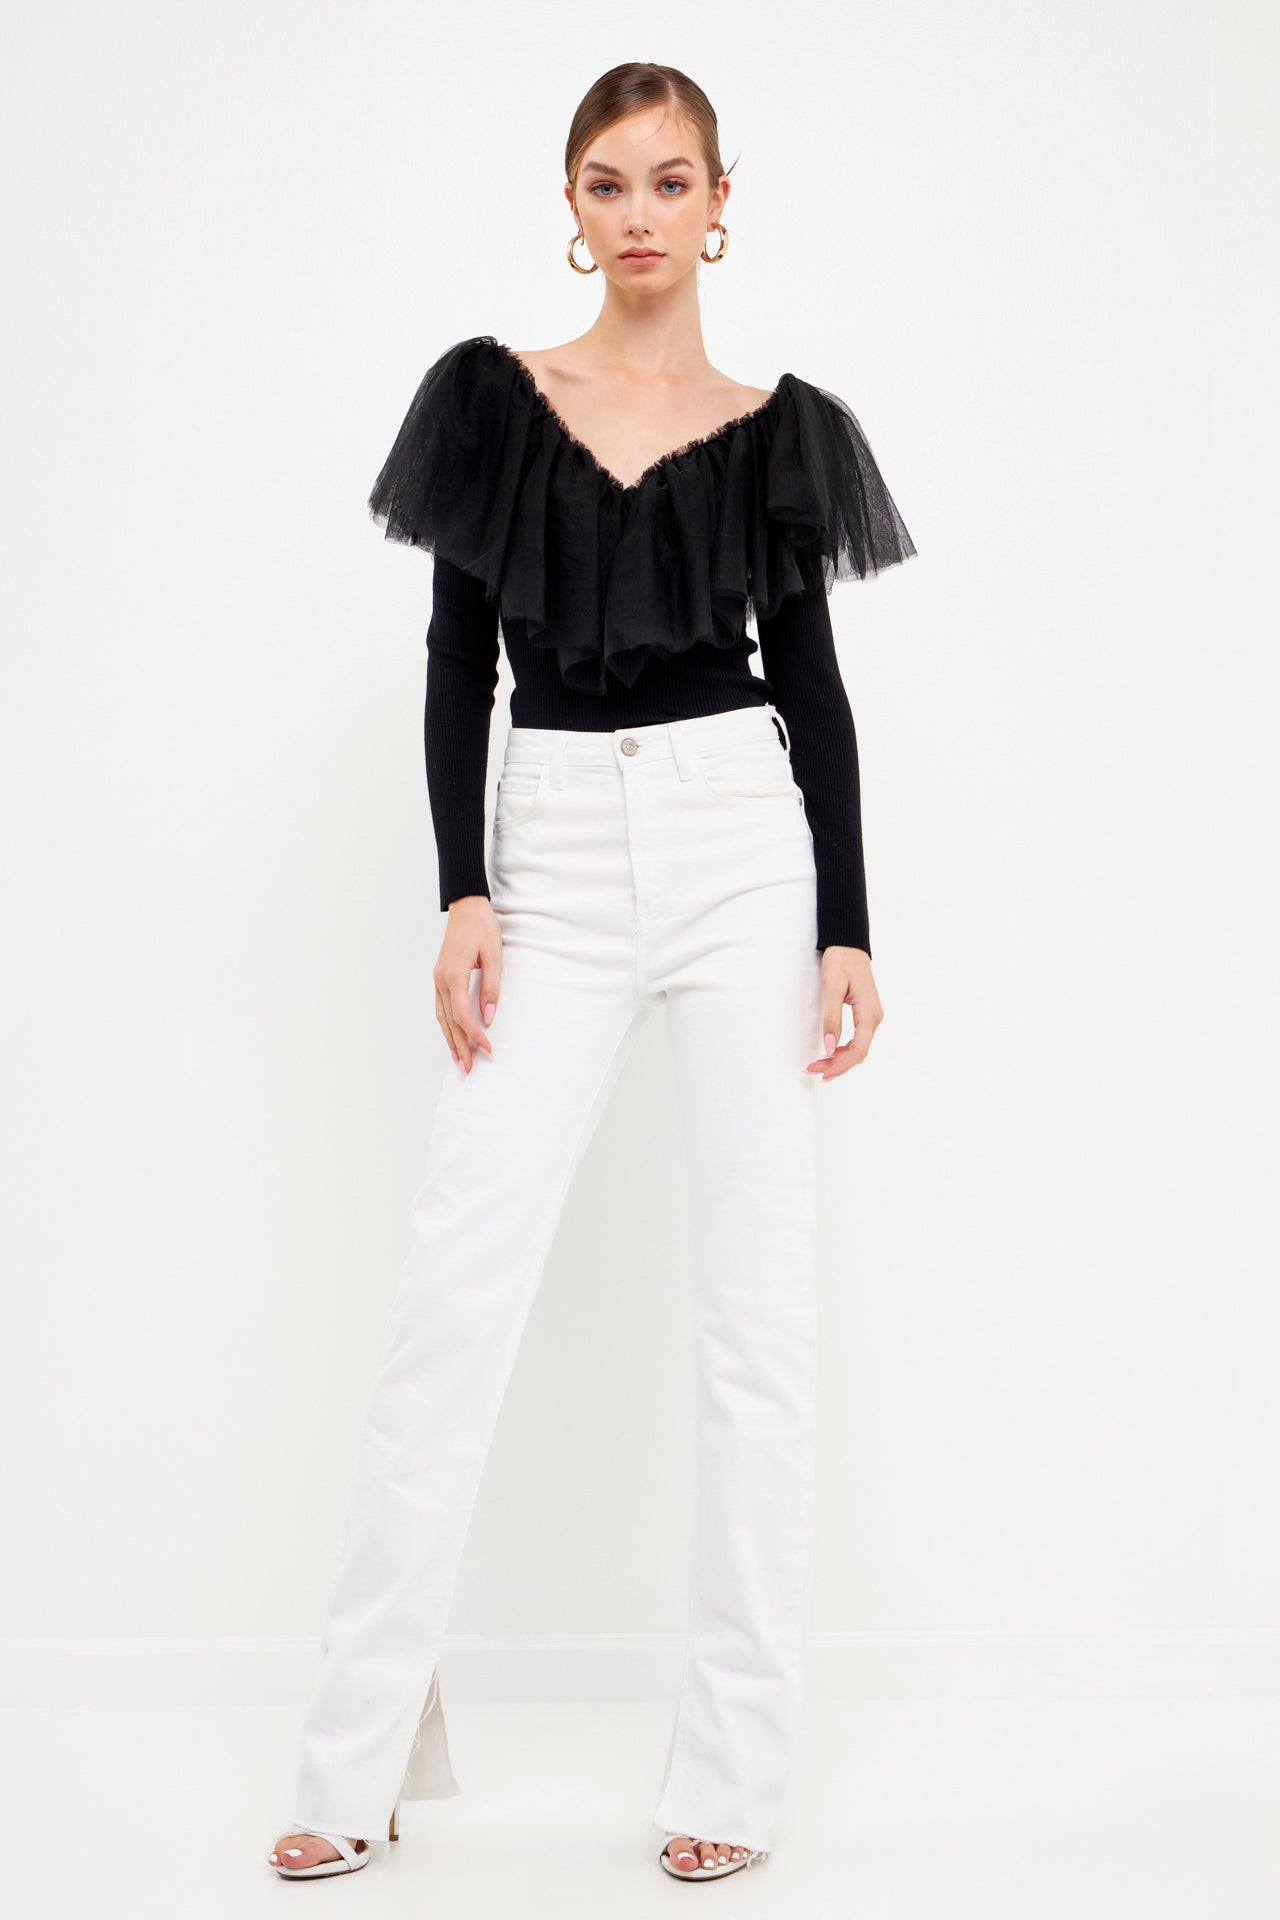 ENDLESS ROSE - Tulle Ruffle Top - TOPS available at Objectrare